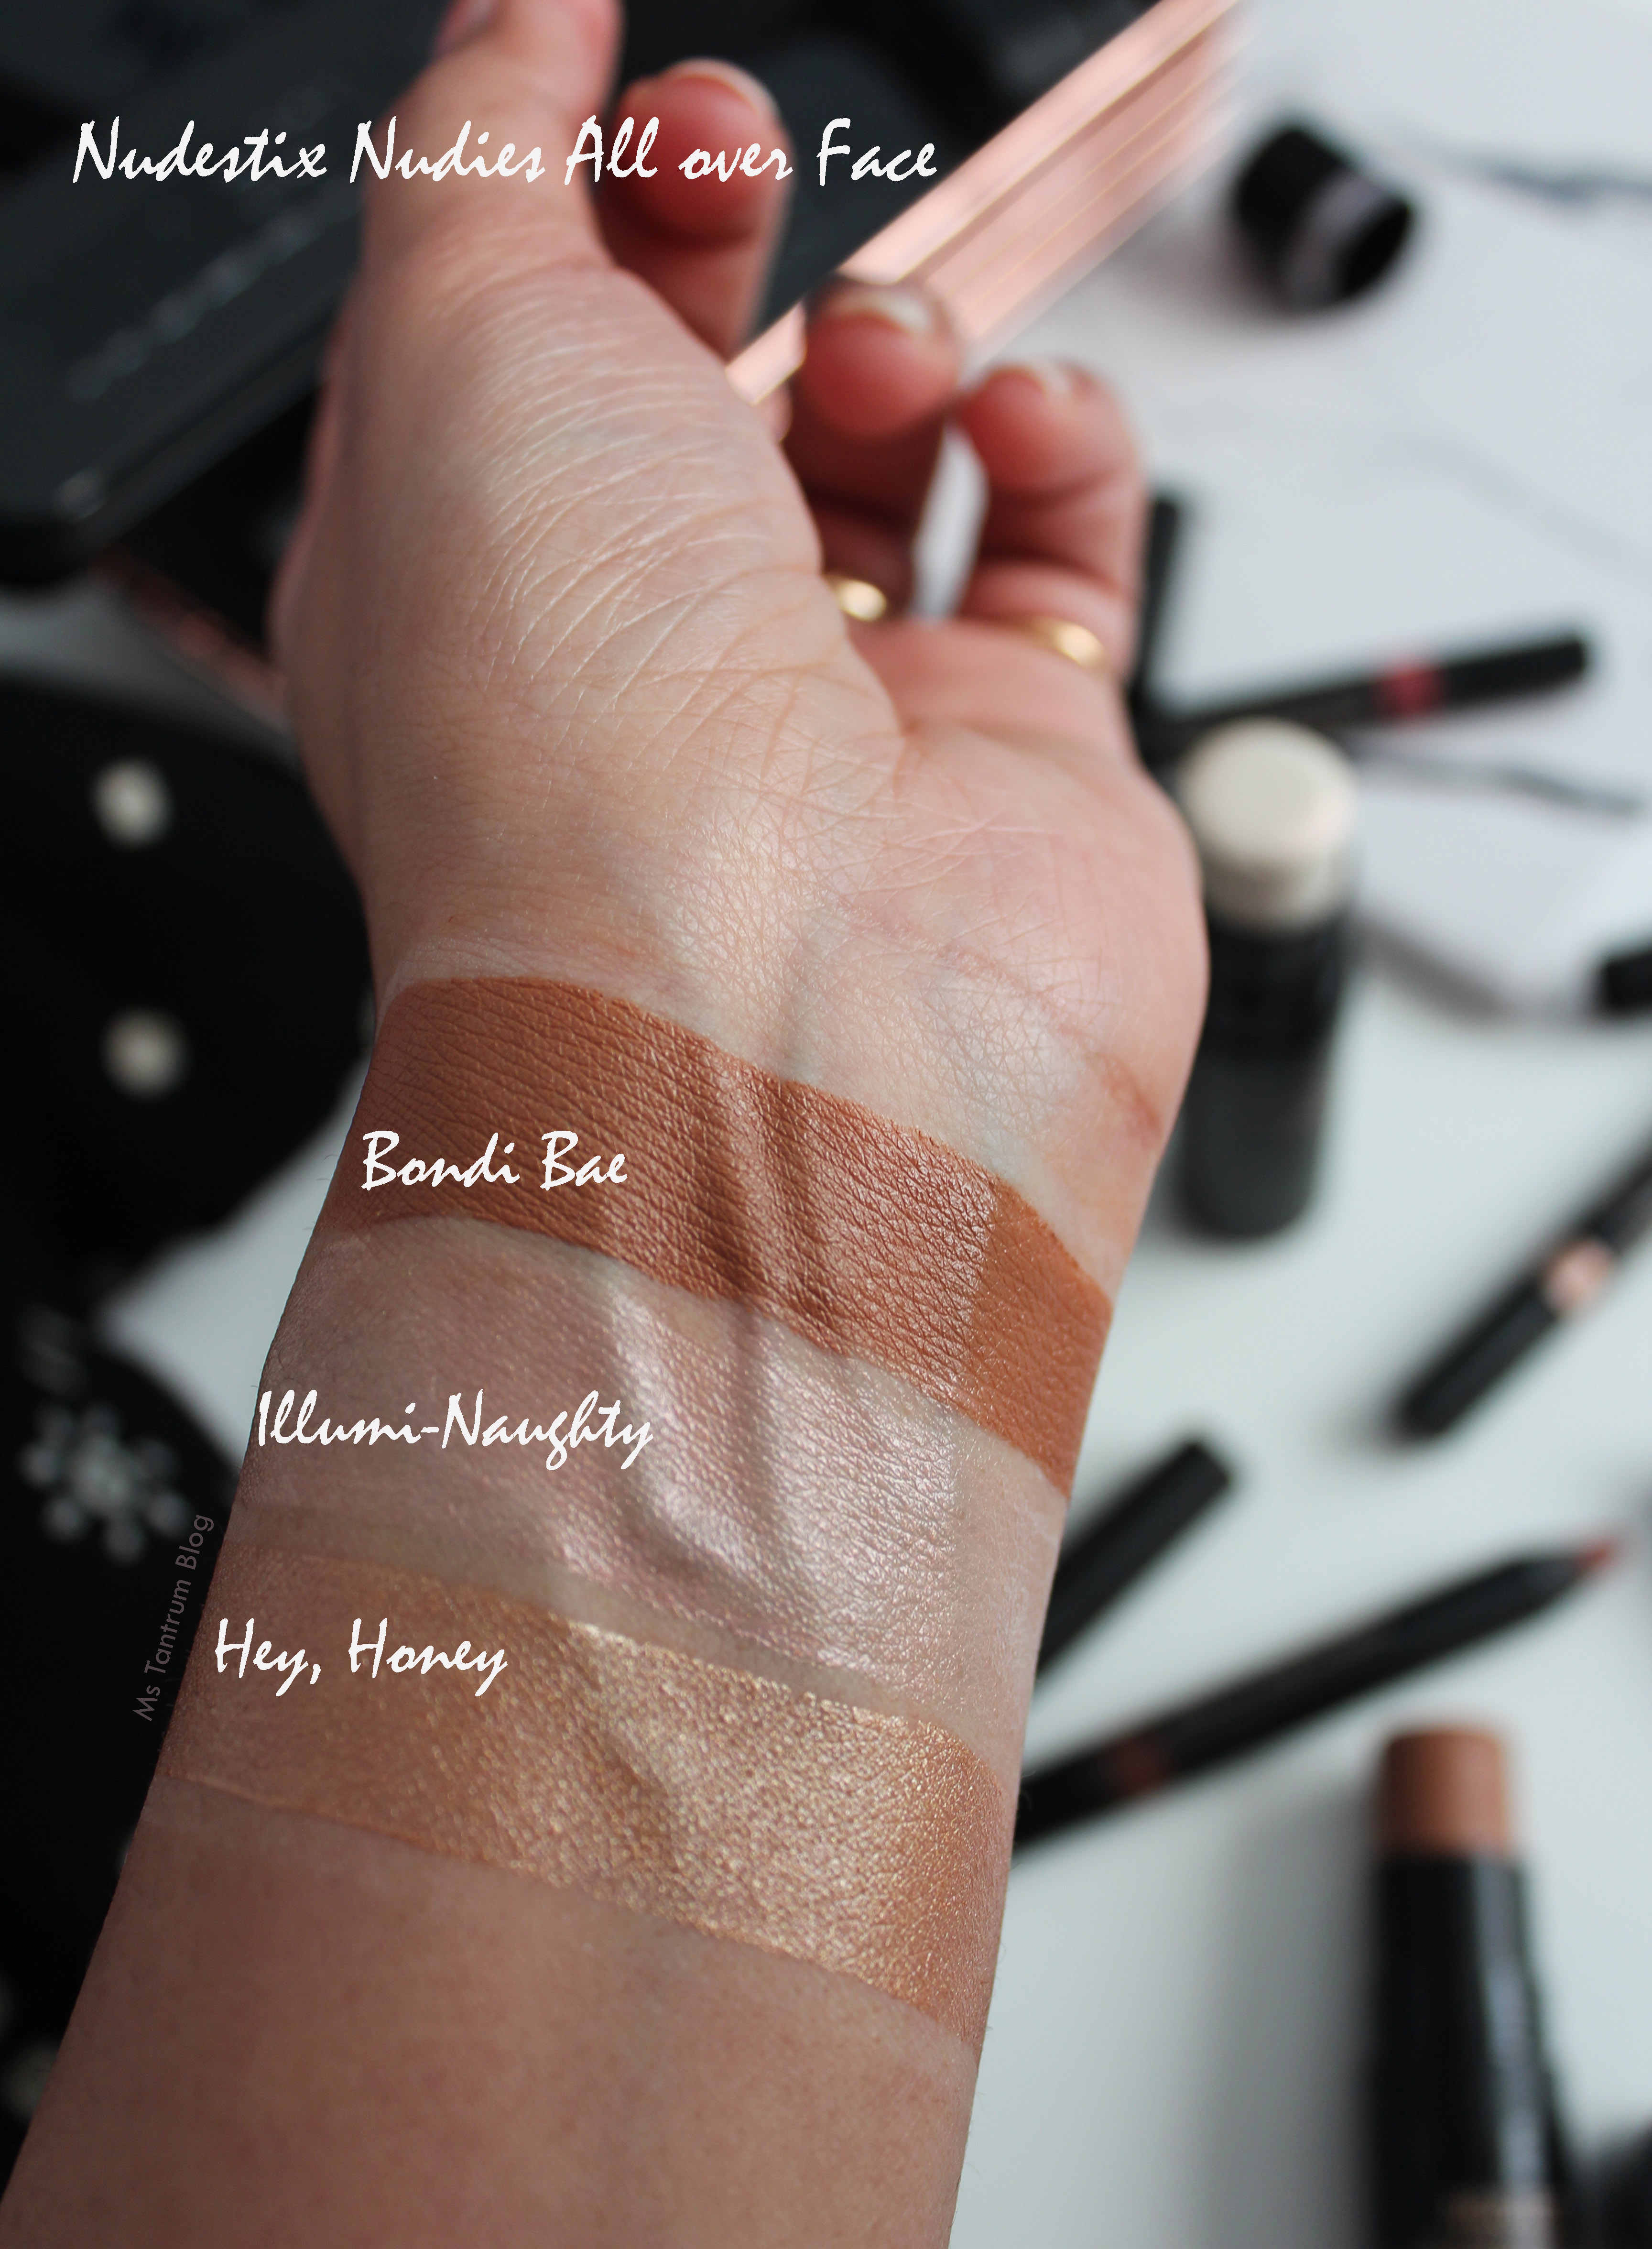 Nudestix Nudies All over Face Swatches - Ms Tantrum Blog